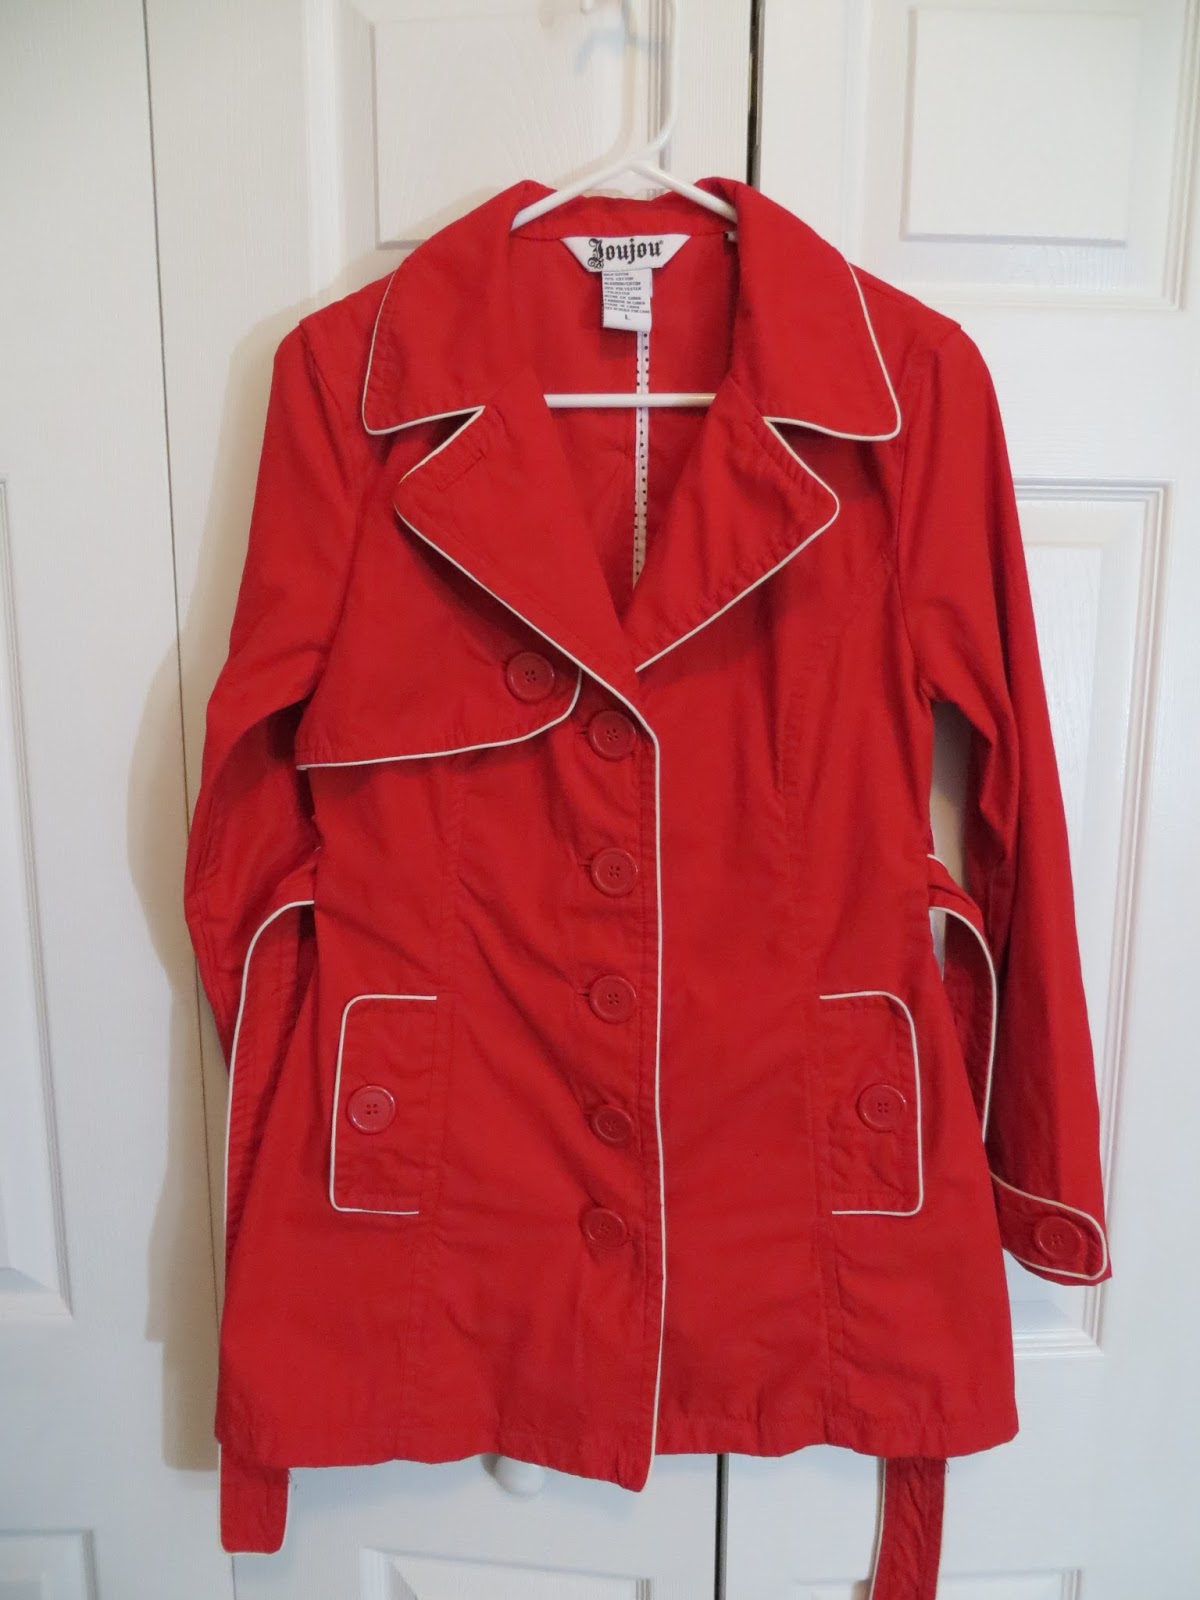 The Confident Journal: Refashioning: Altering a Trench Coat